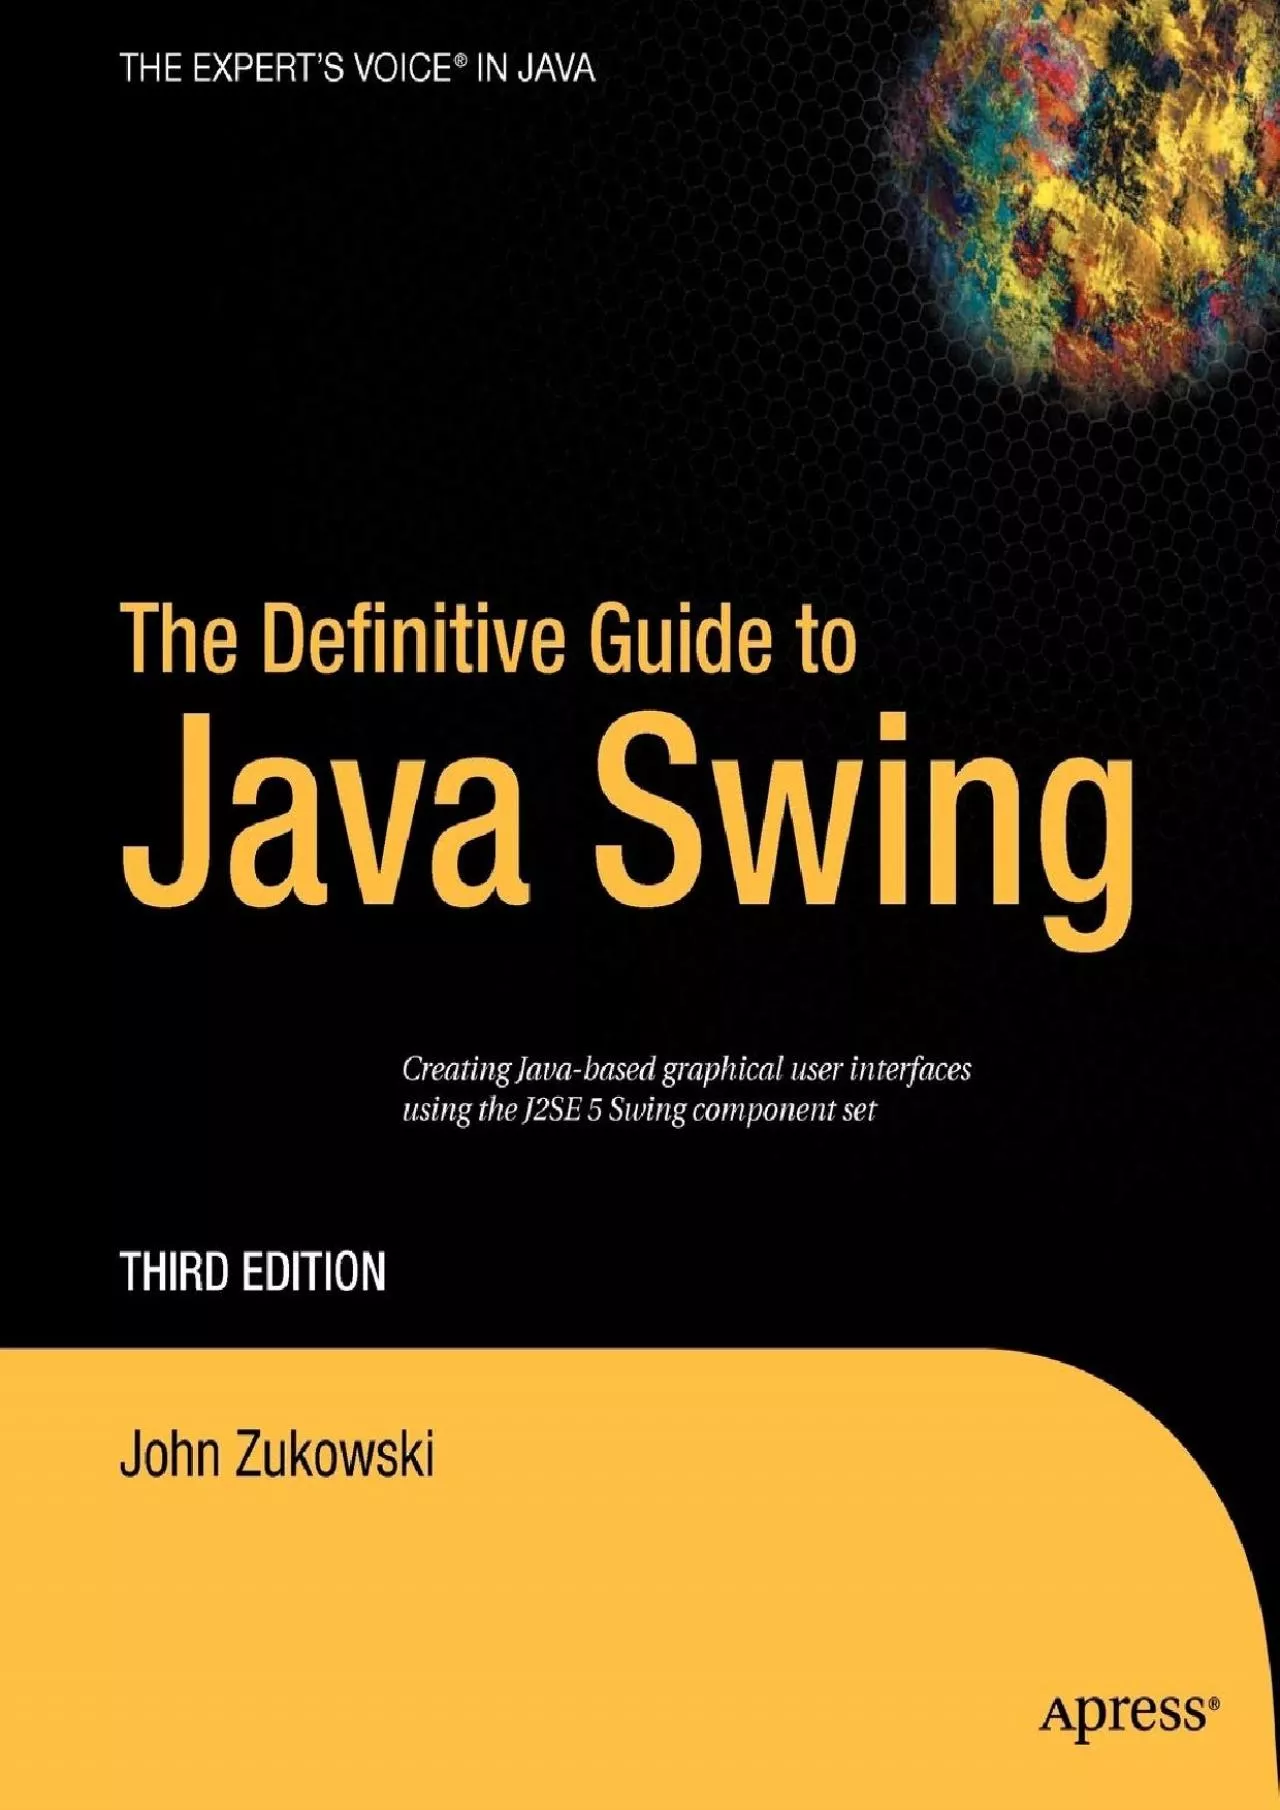 [READING BOOK]-The Definitive Guide to Java Swing (Definitive Guides (Paperback))